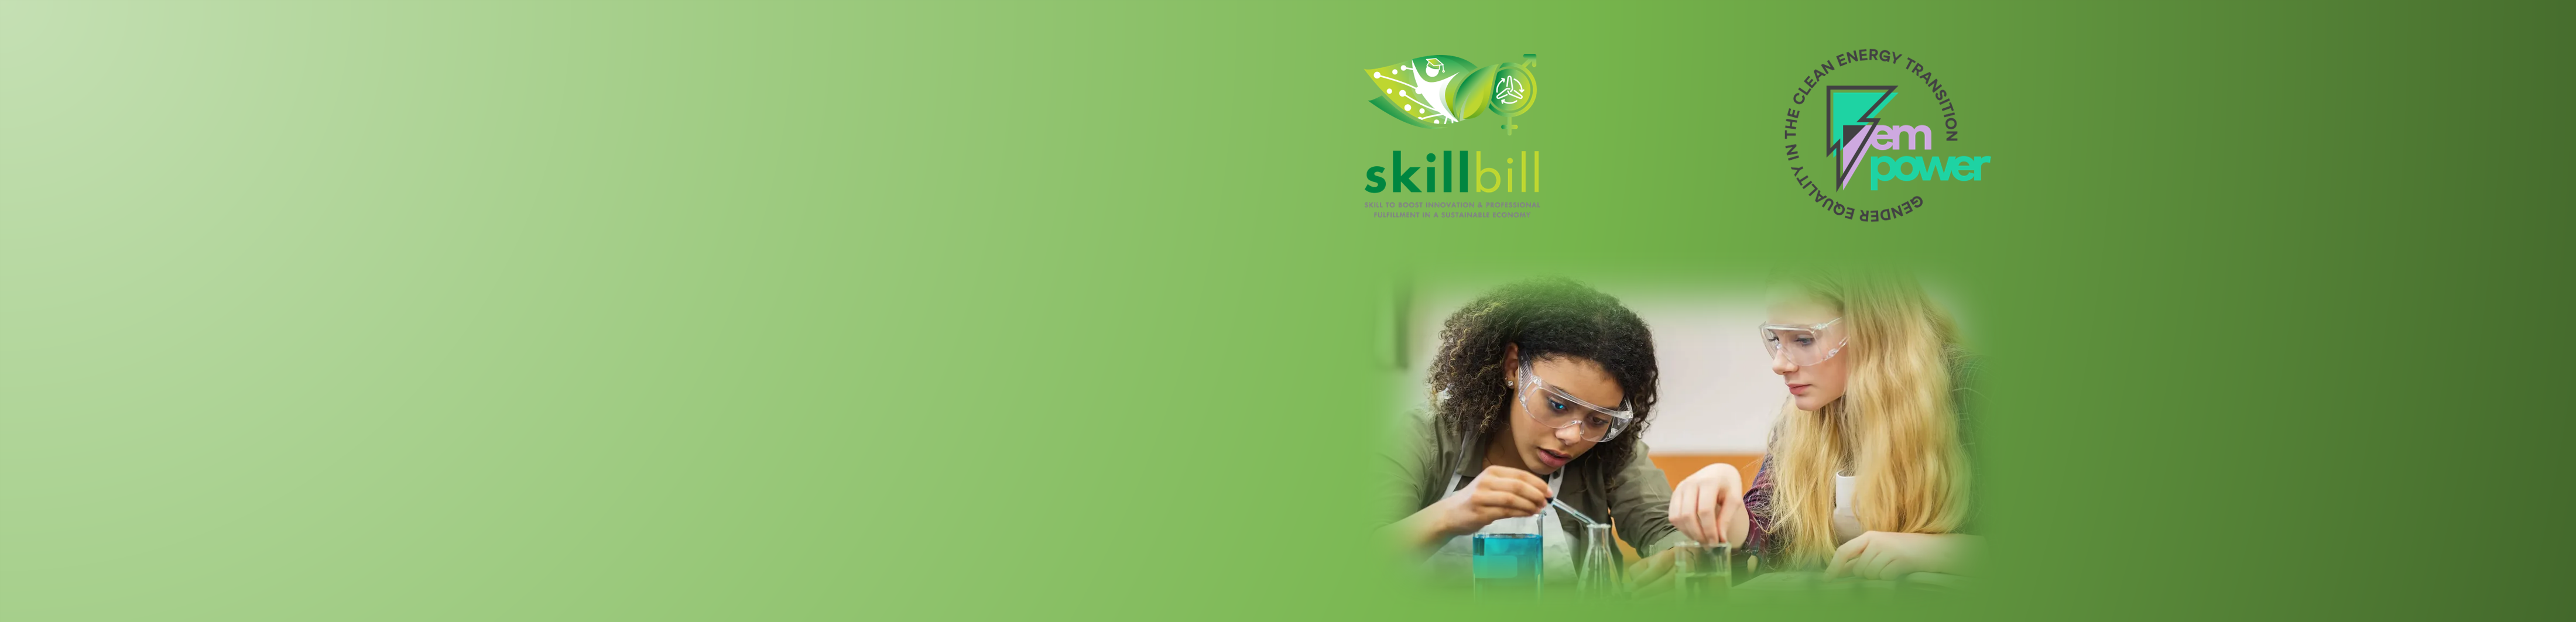 Uniting Forces for Empowerment: SKILLBILL and FemPower Join Hands